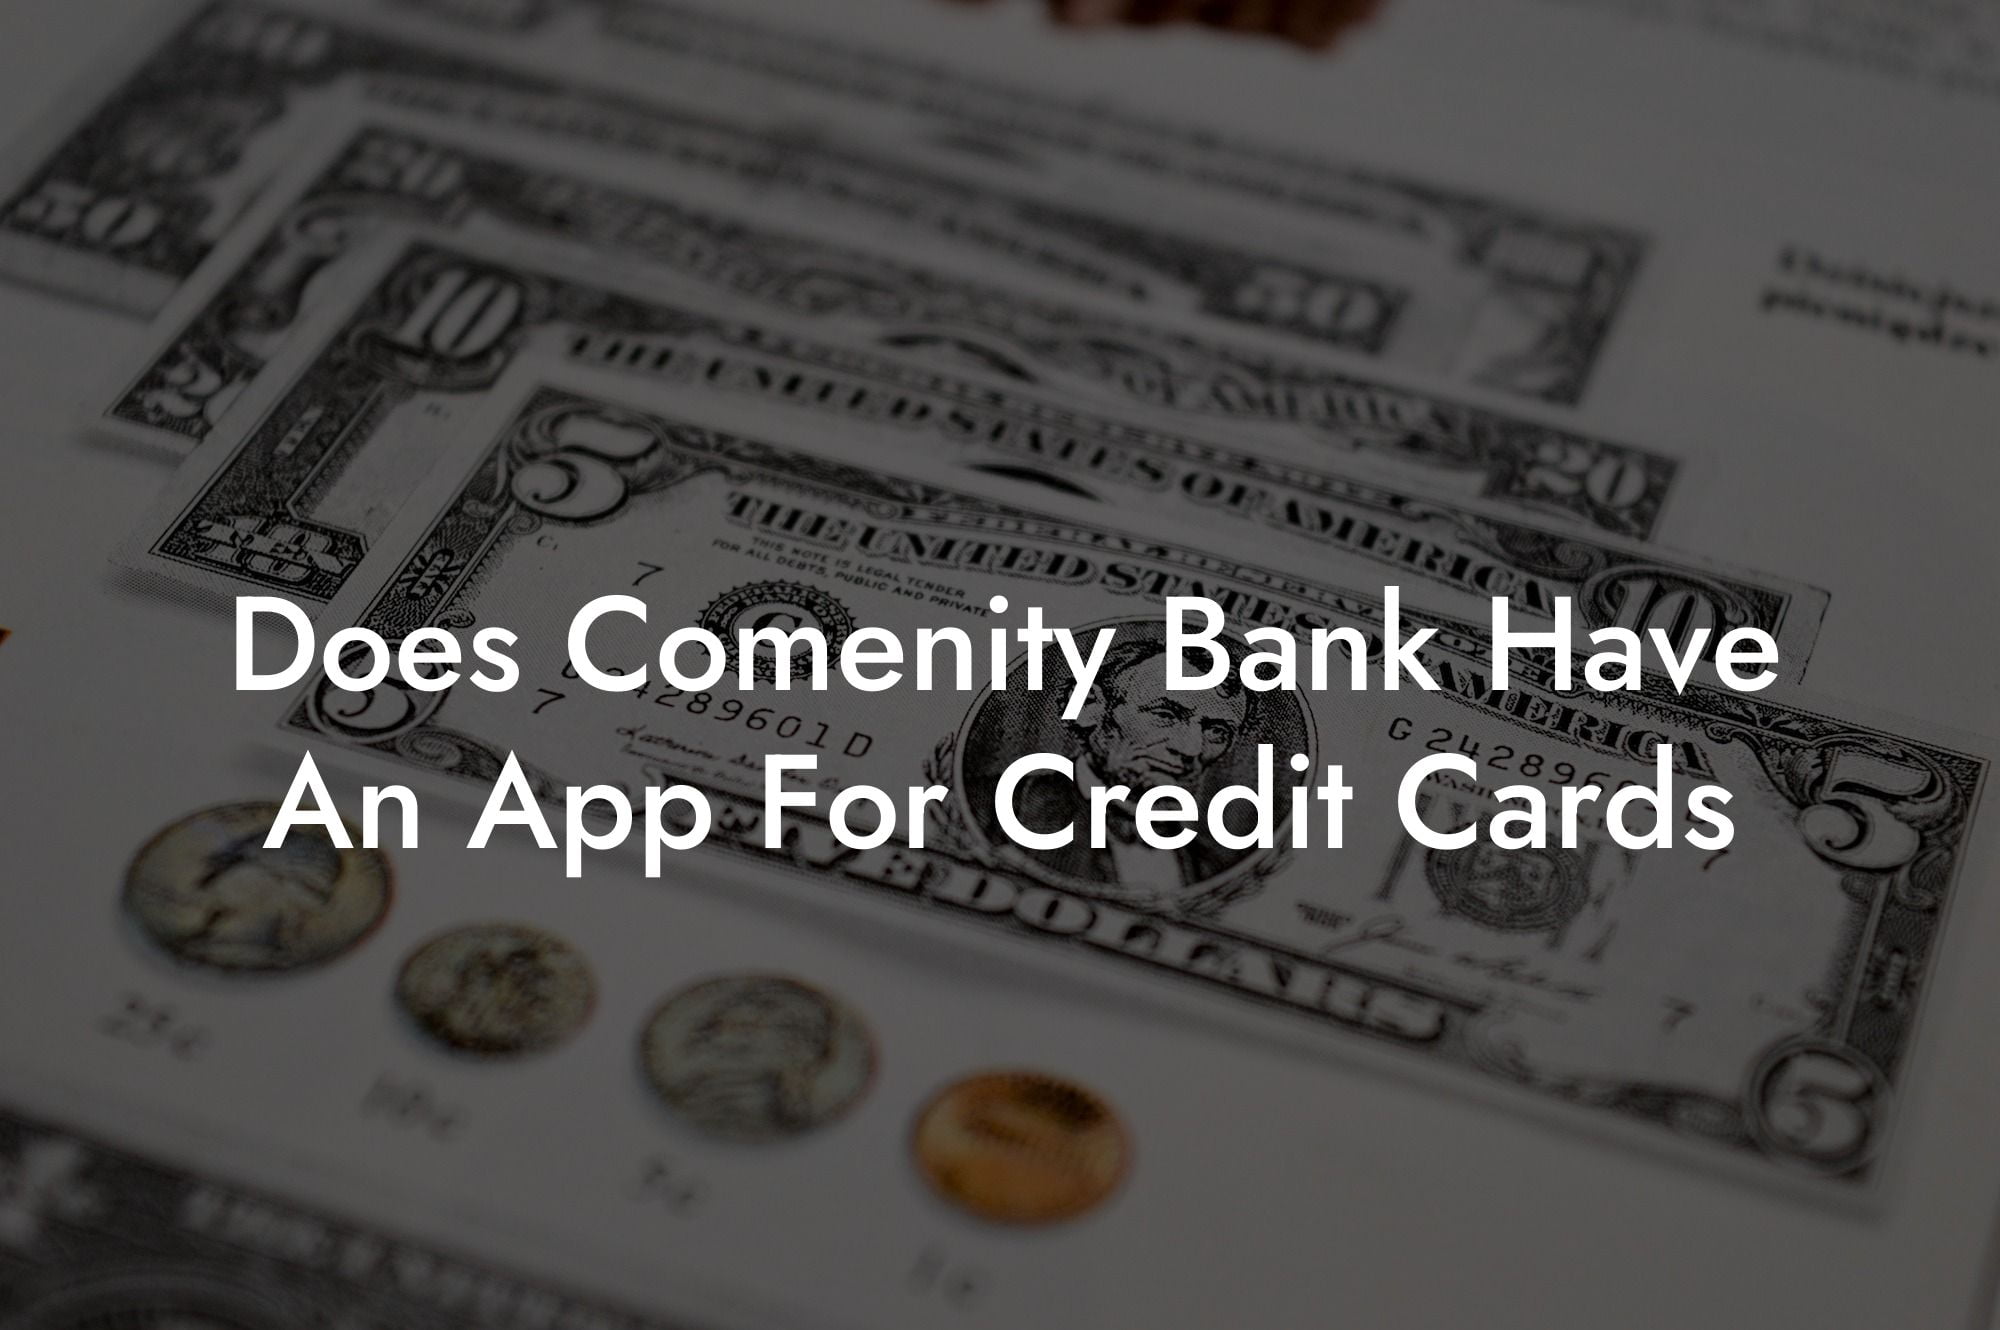 Does Comenity Bank Have An App For Credit Cards